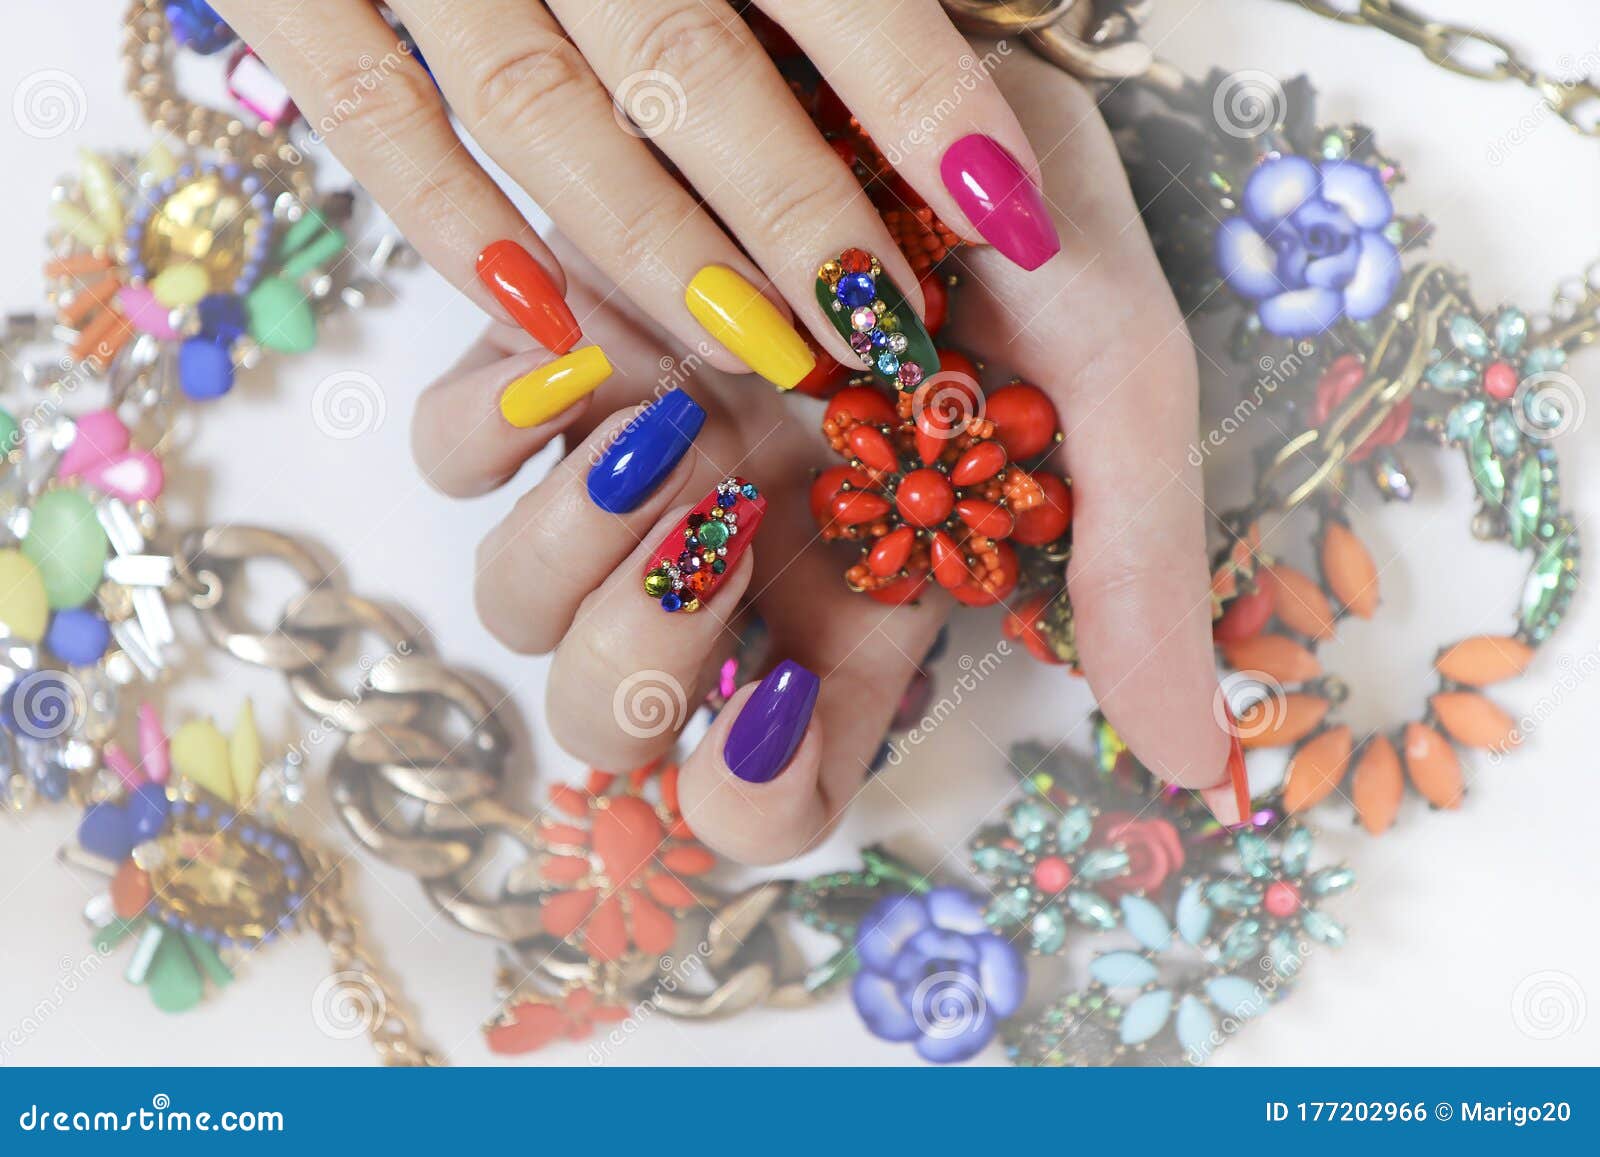 creative bright saturated manicure on long nails with rhinestones.